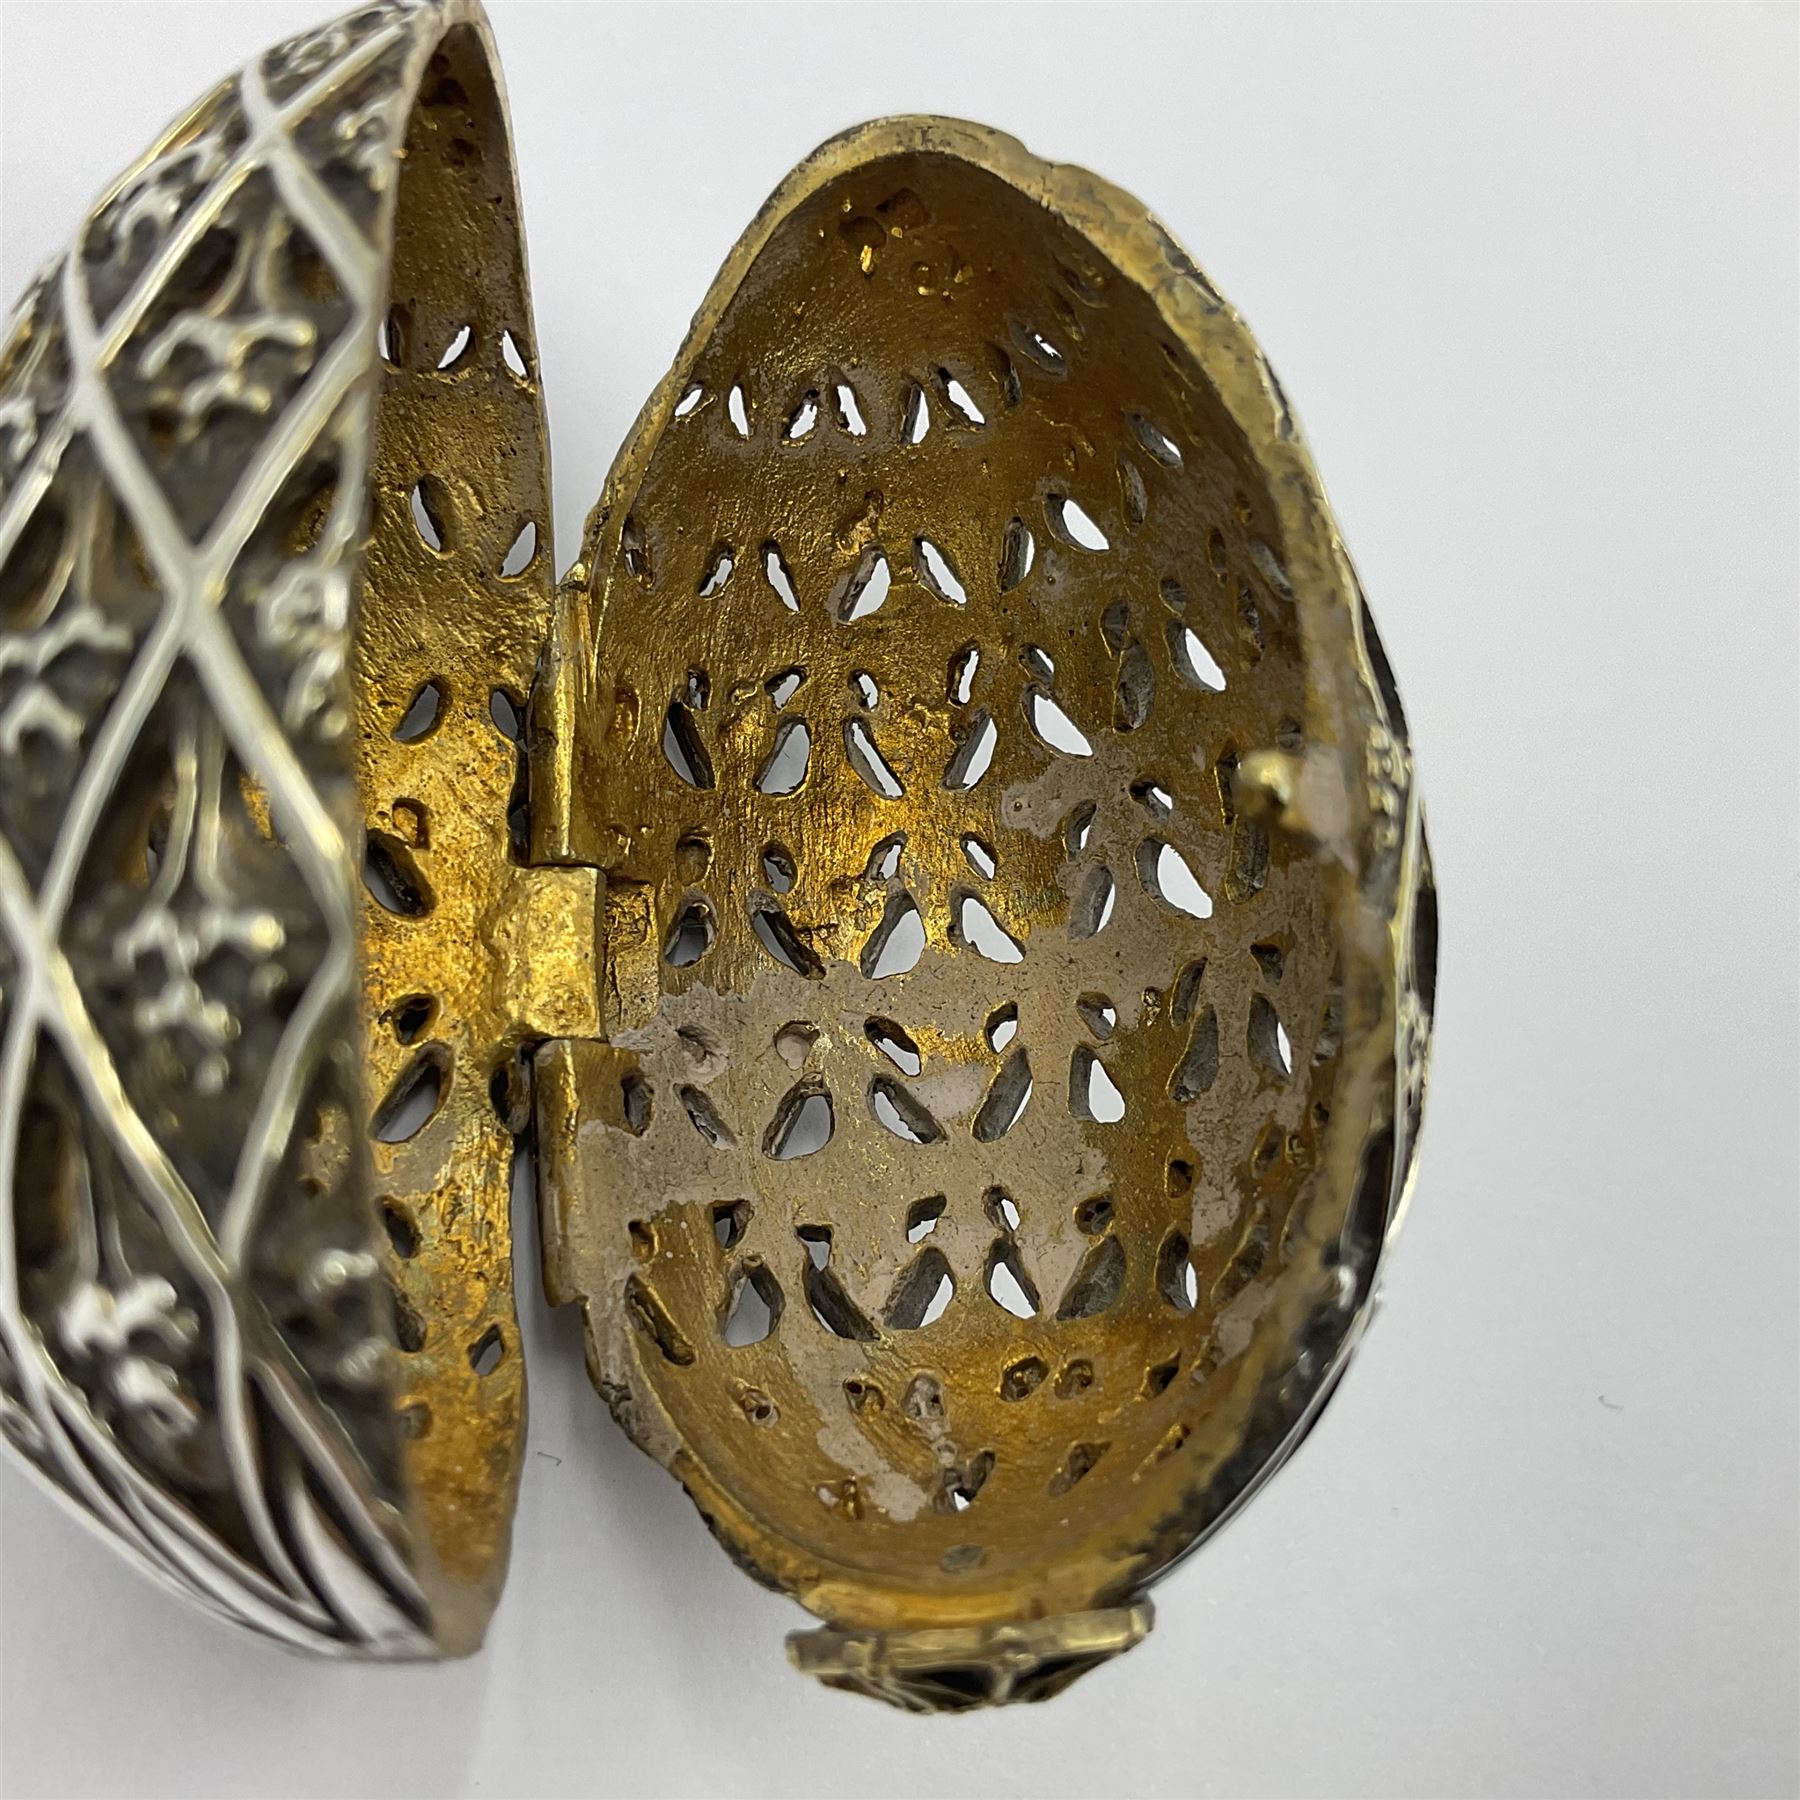 Modern silver limited edition Easter egg - Image 9 of 19